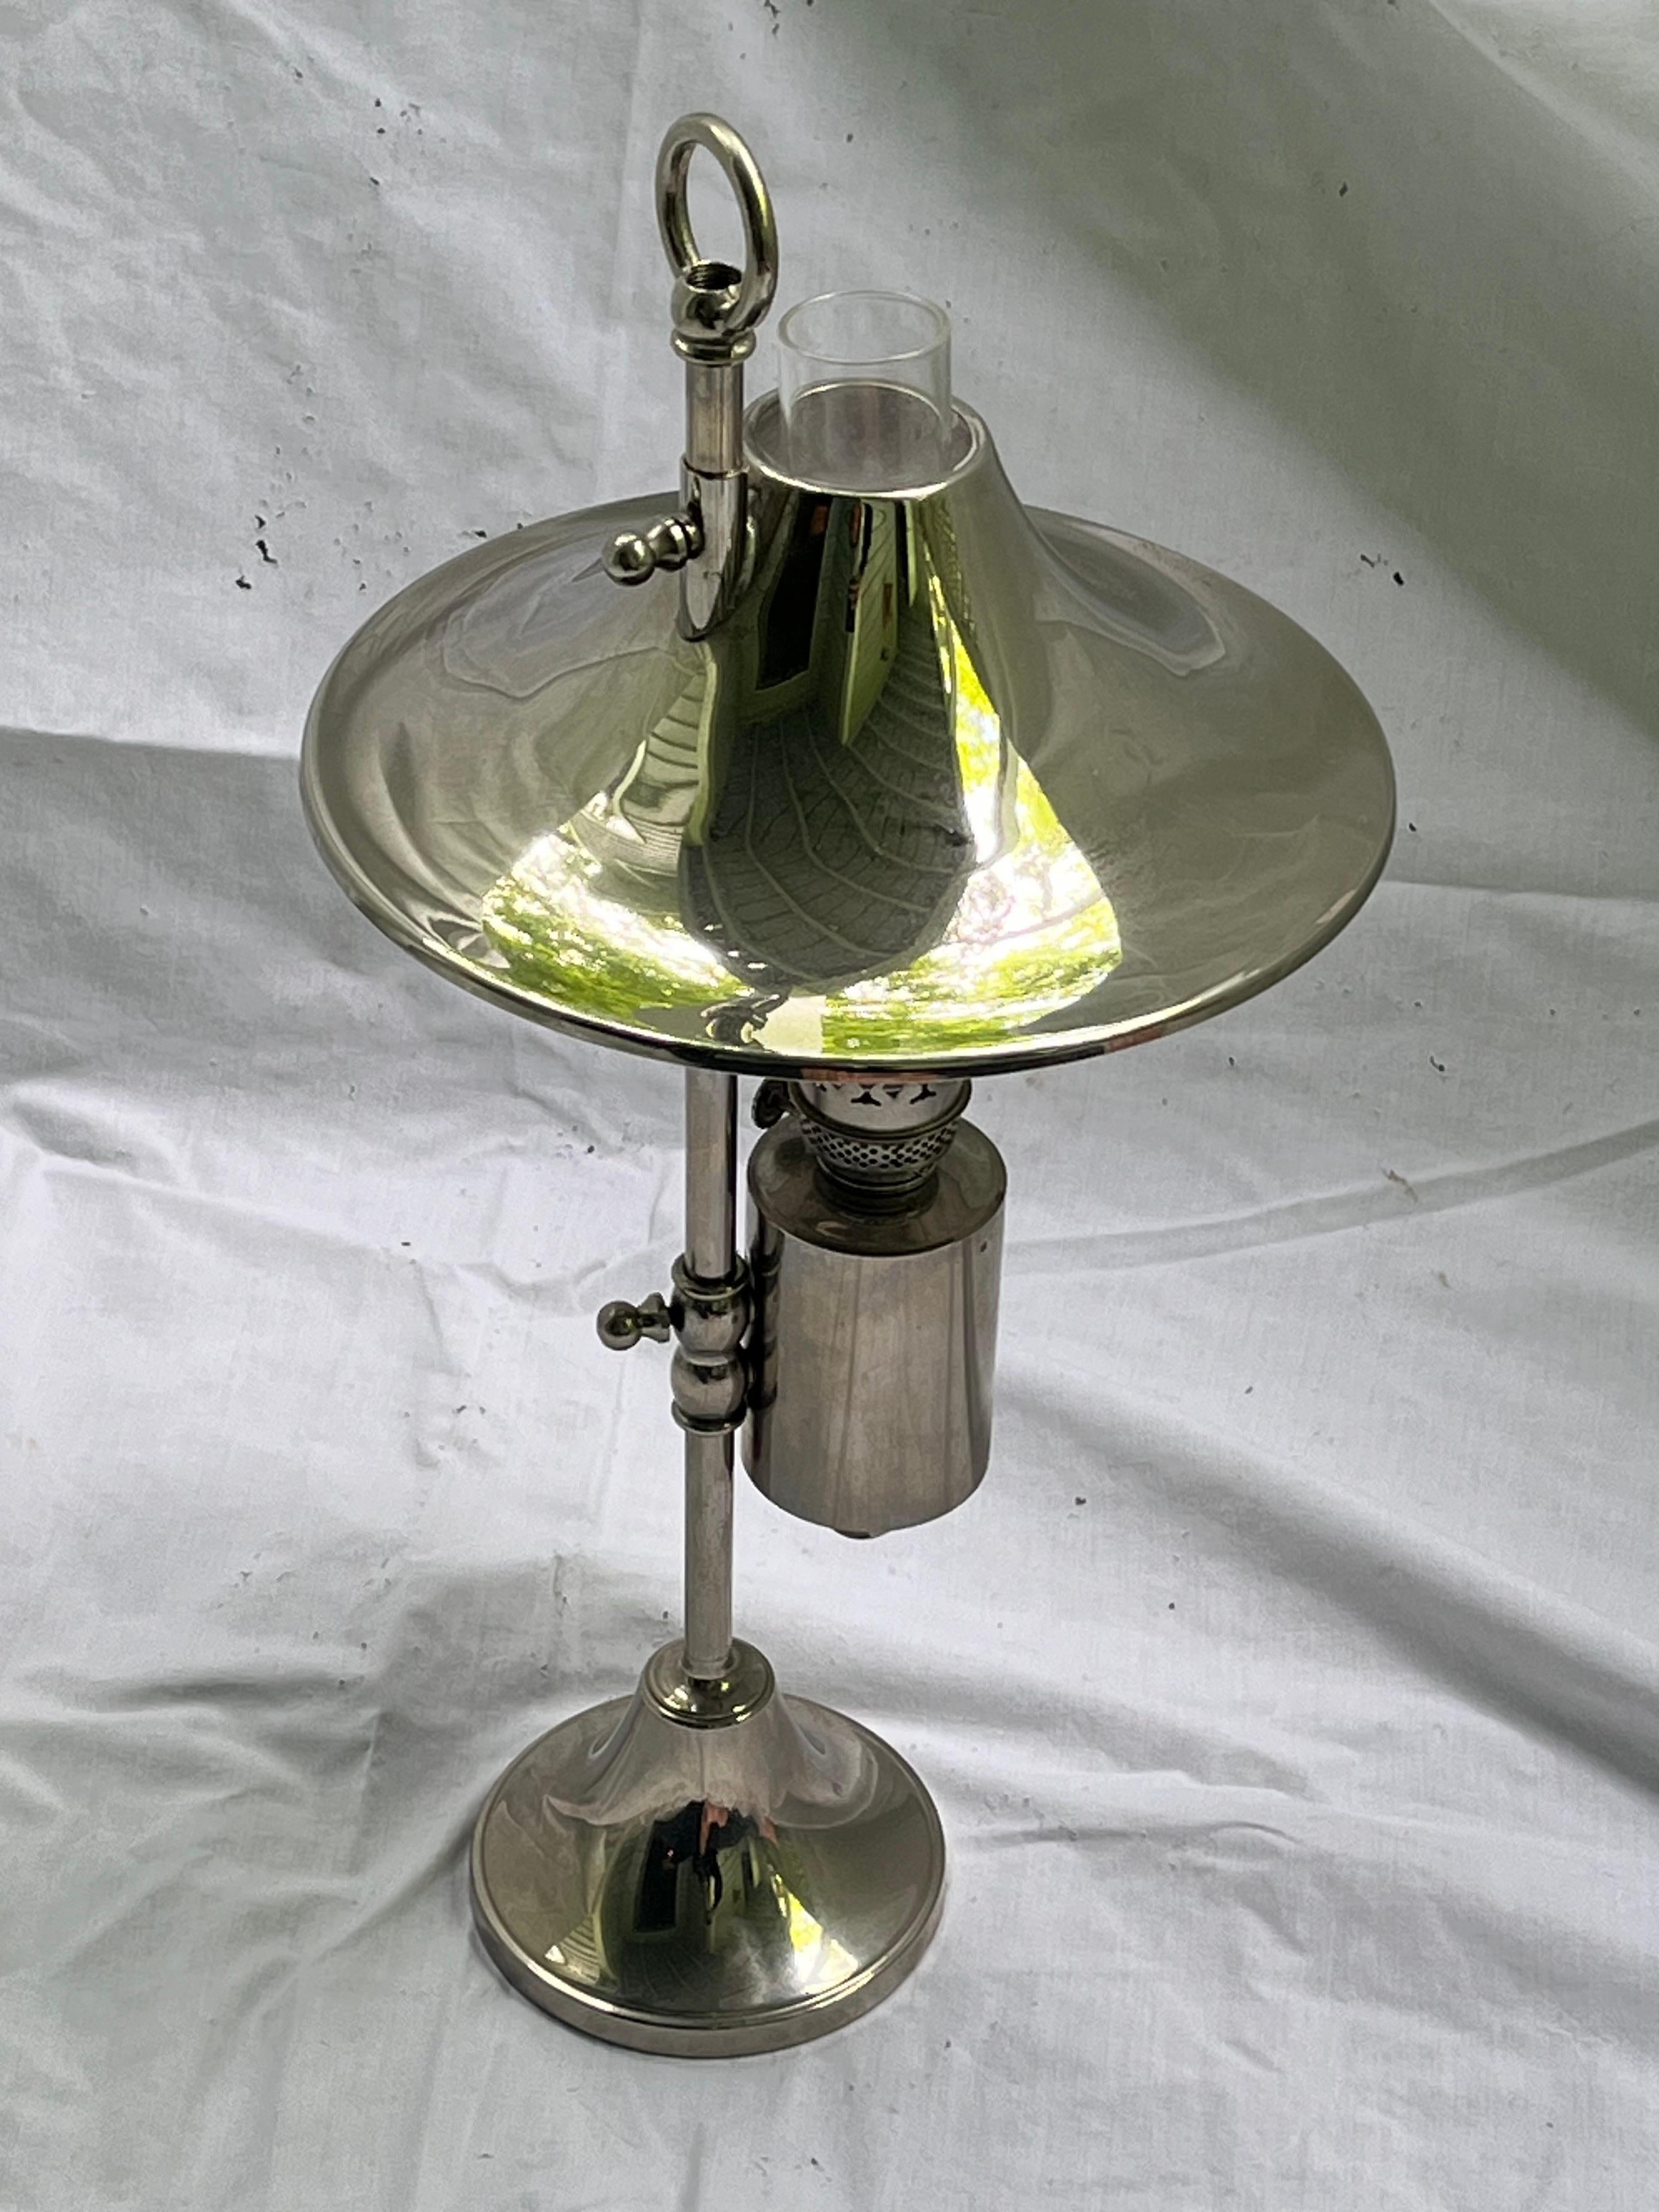 Mid Century Danish Modern Silver Plate Oil Lamp Adjustable Shade Glass Insert In Good Condition For Sale In Atlanta, GA